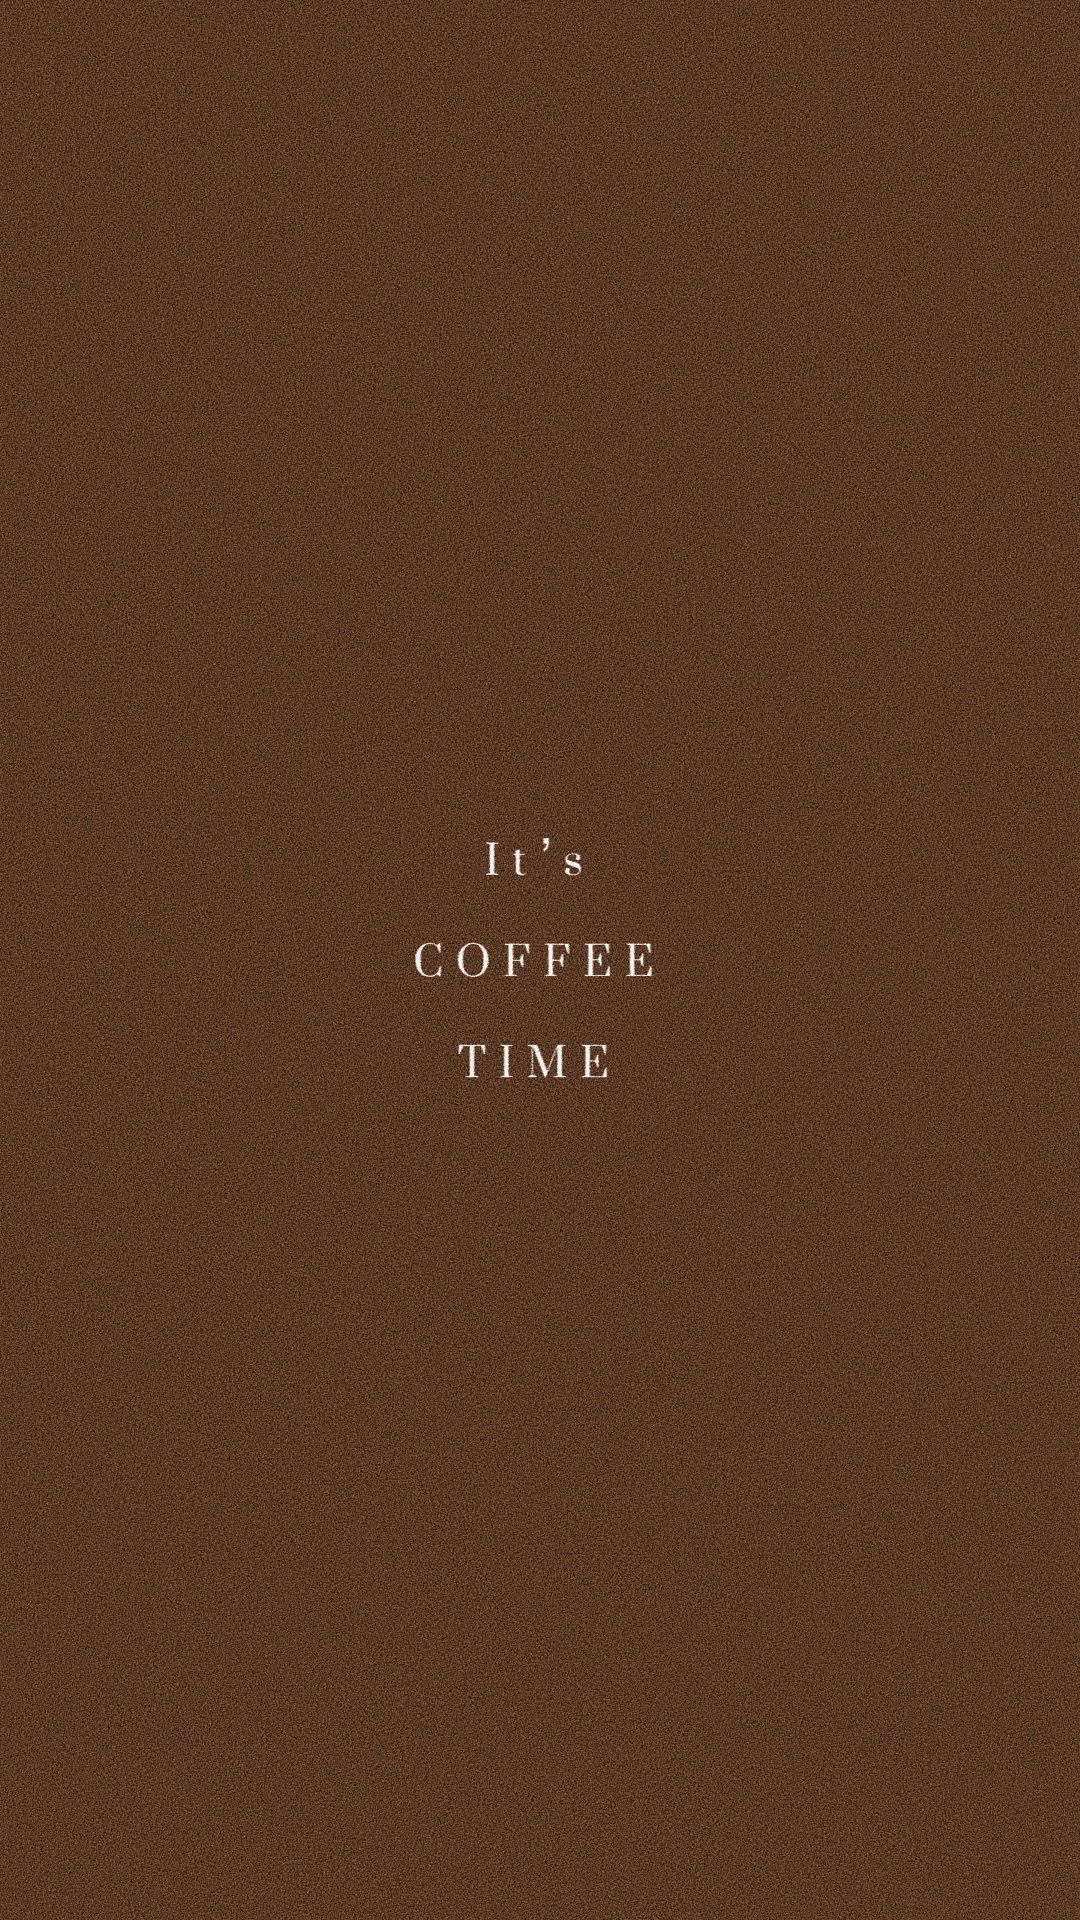 Coffee Brown Aesthetic Quote Wallpaper